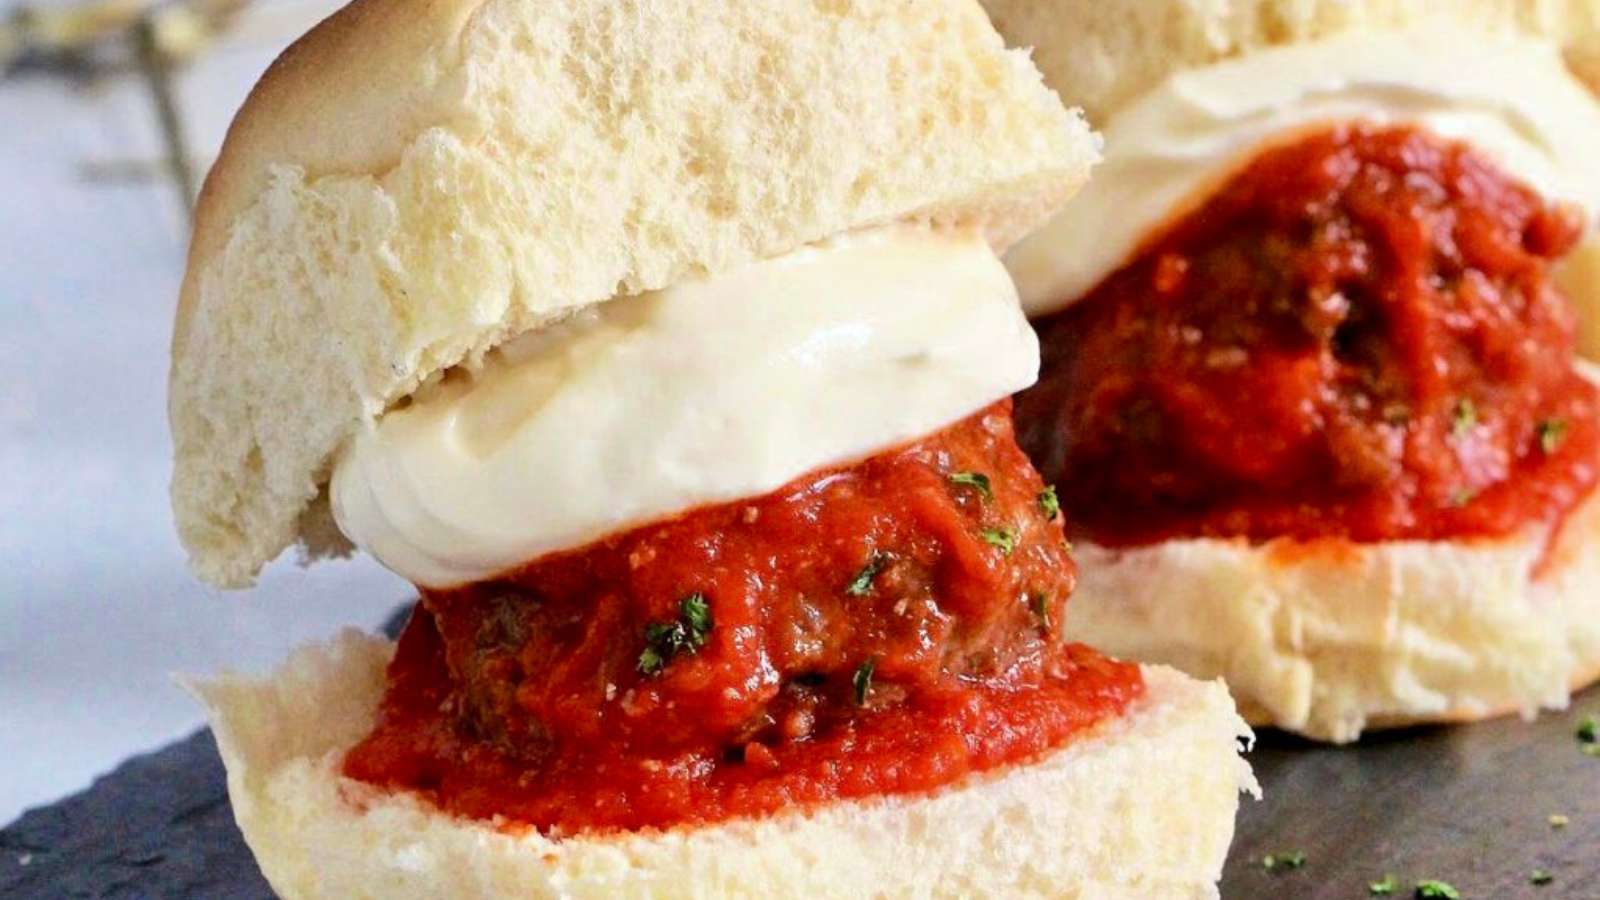 Meatball sliders with sauce and ricotta.